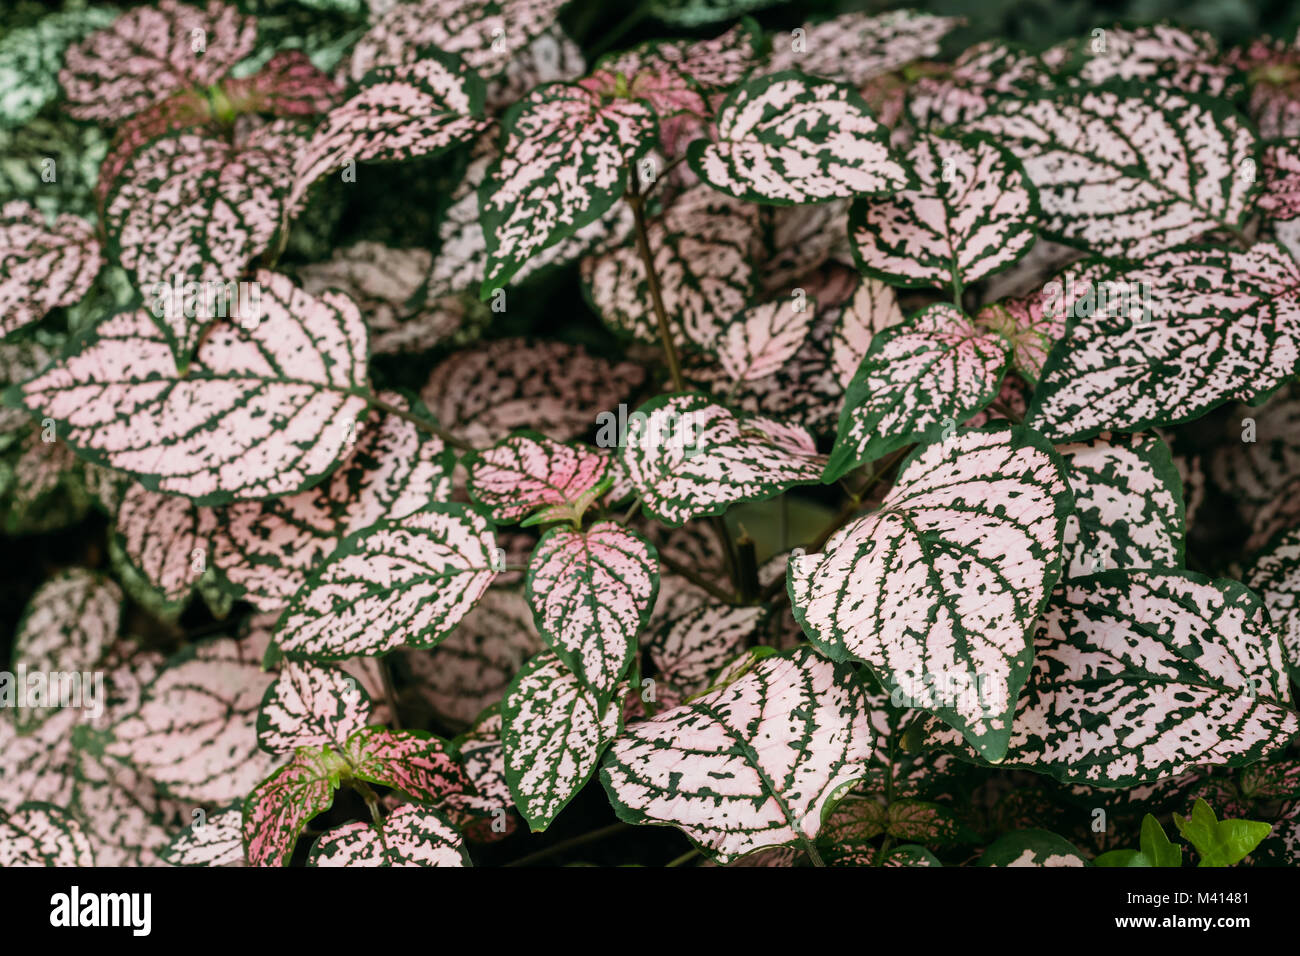 Green And Pink Leaves Of Hypoestes Phyllostachya In Botanical Garden. Stock Photo